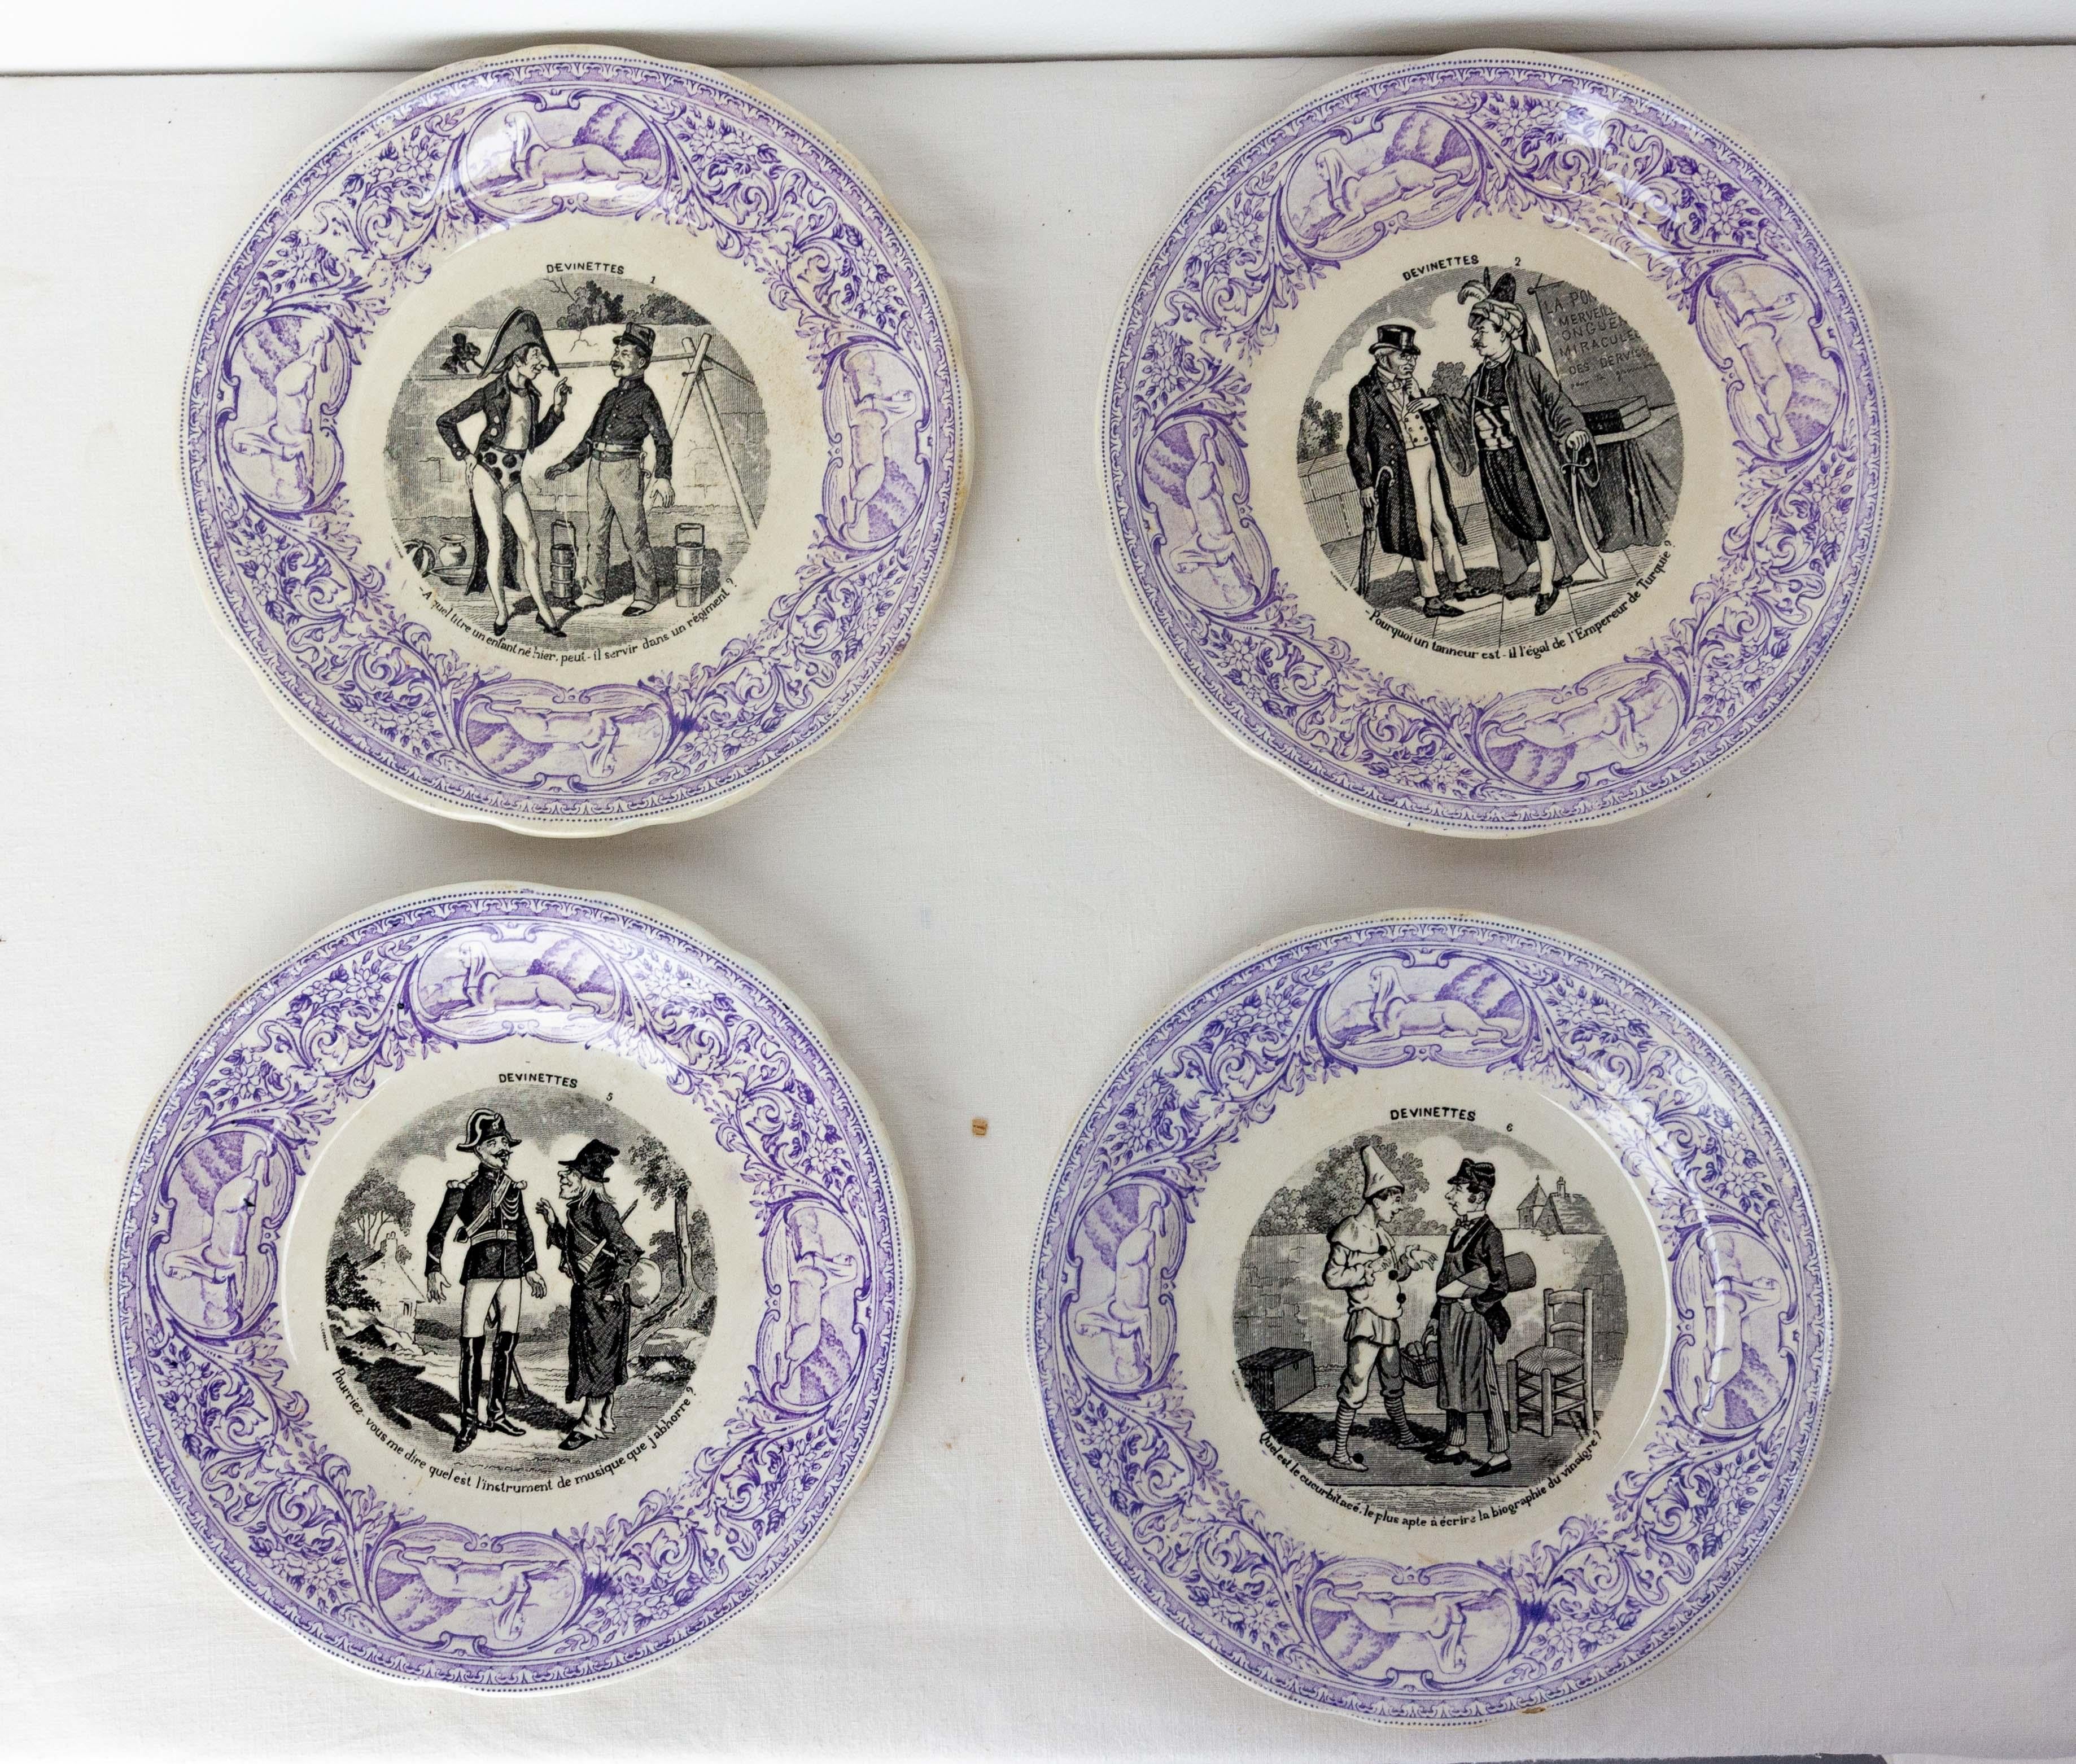 French set of four faience plates, made in the manufacture of Sarreguemines in the late 19th century.
This set of historyzed plates has on each plate a riddle: one of the two characters tells it to a listener (the answers are on the back of each